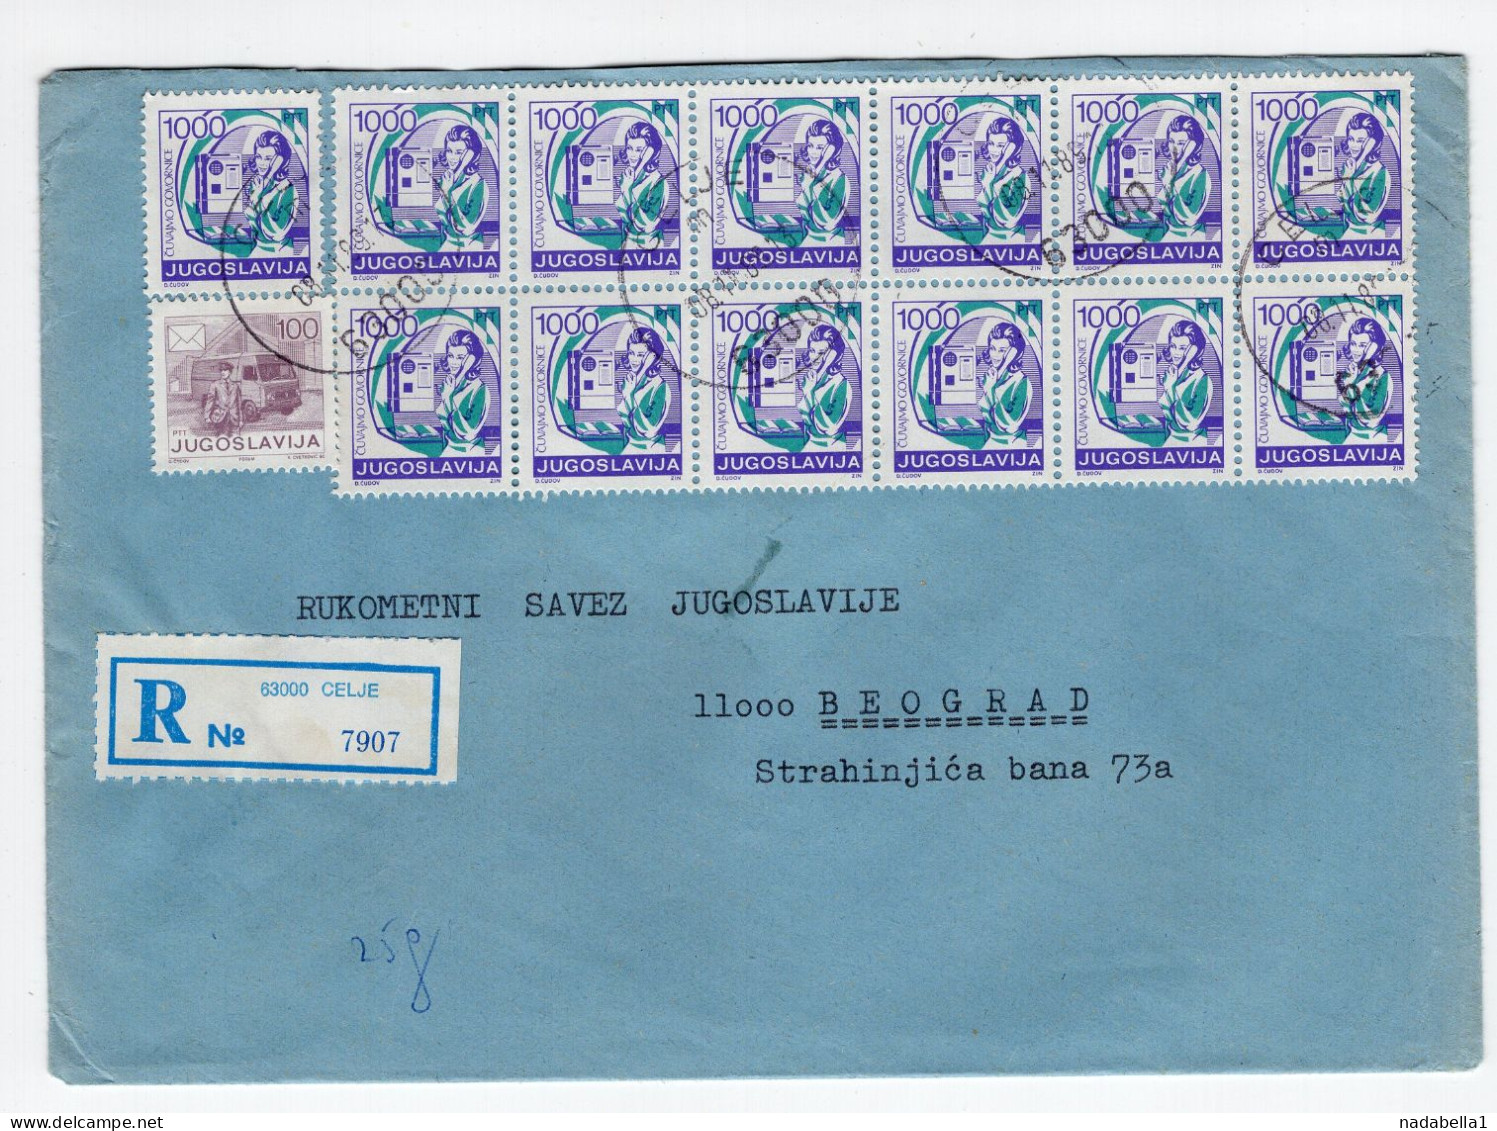 1989. YUGOSLAVIA,SLOVENIA,CELJE RECORDED COVER SENT TO BELGRADE,13100 DIN. FRANKING,INFLATION MAIL - Covers & Documents